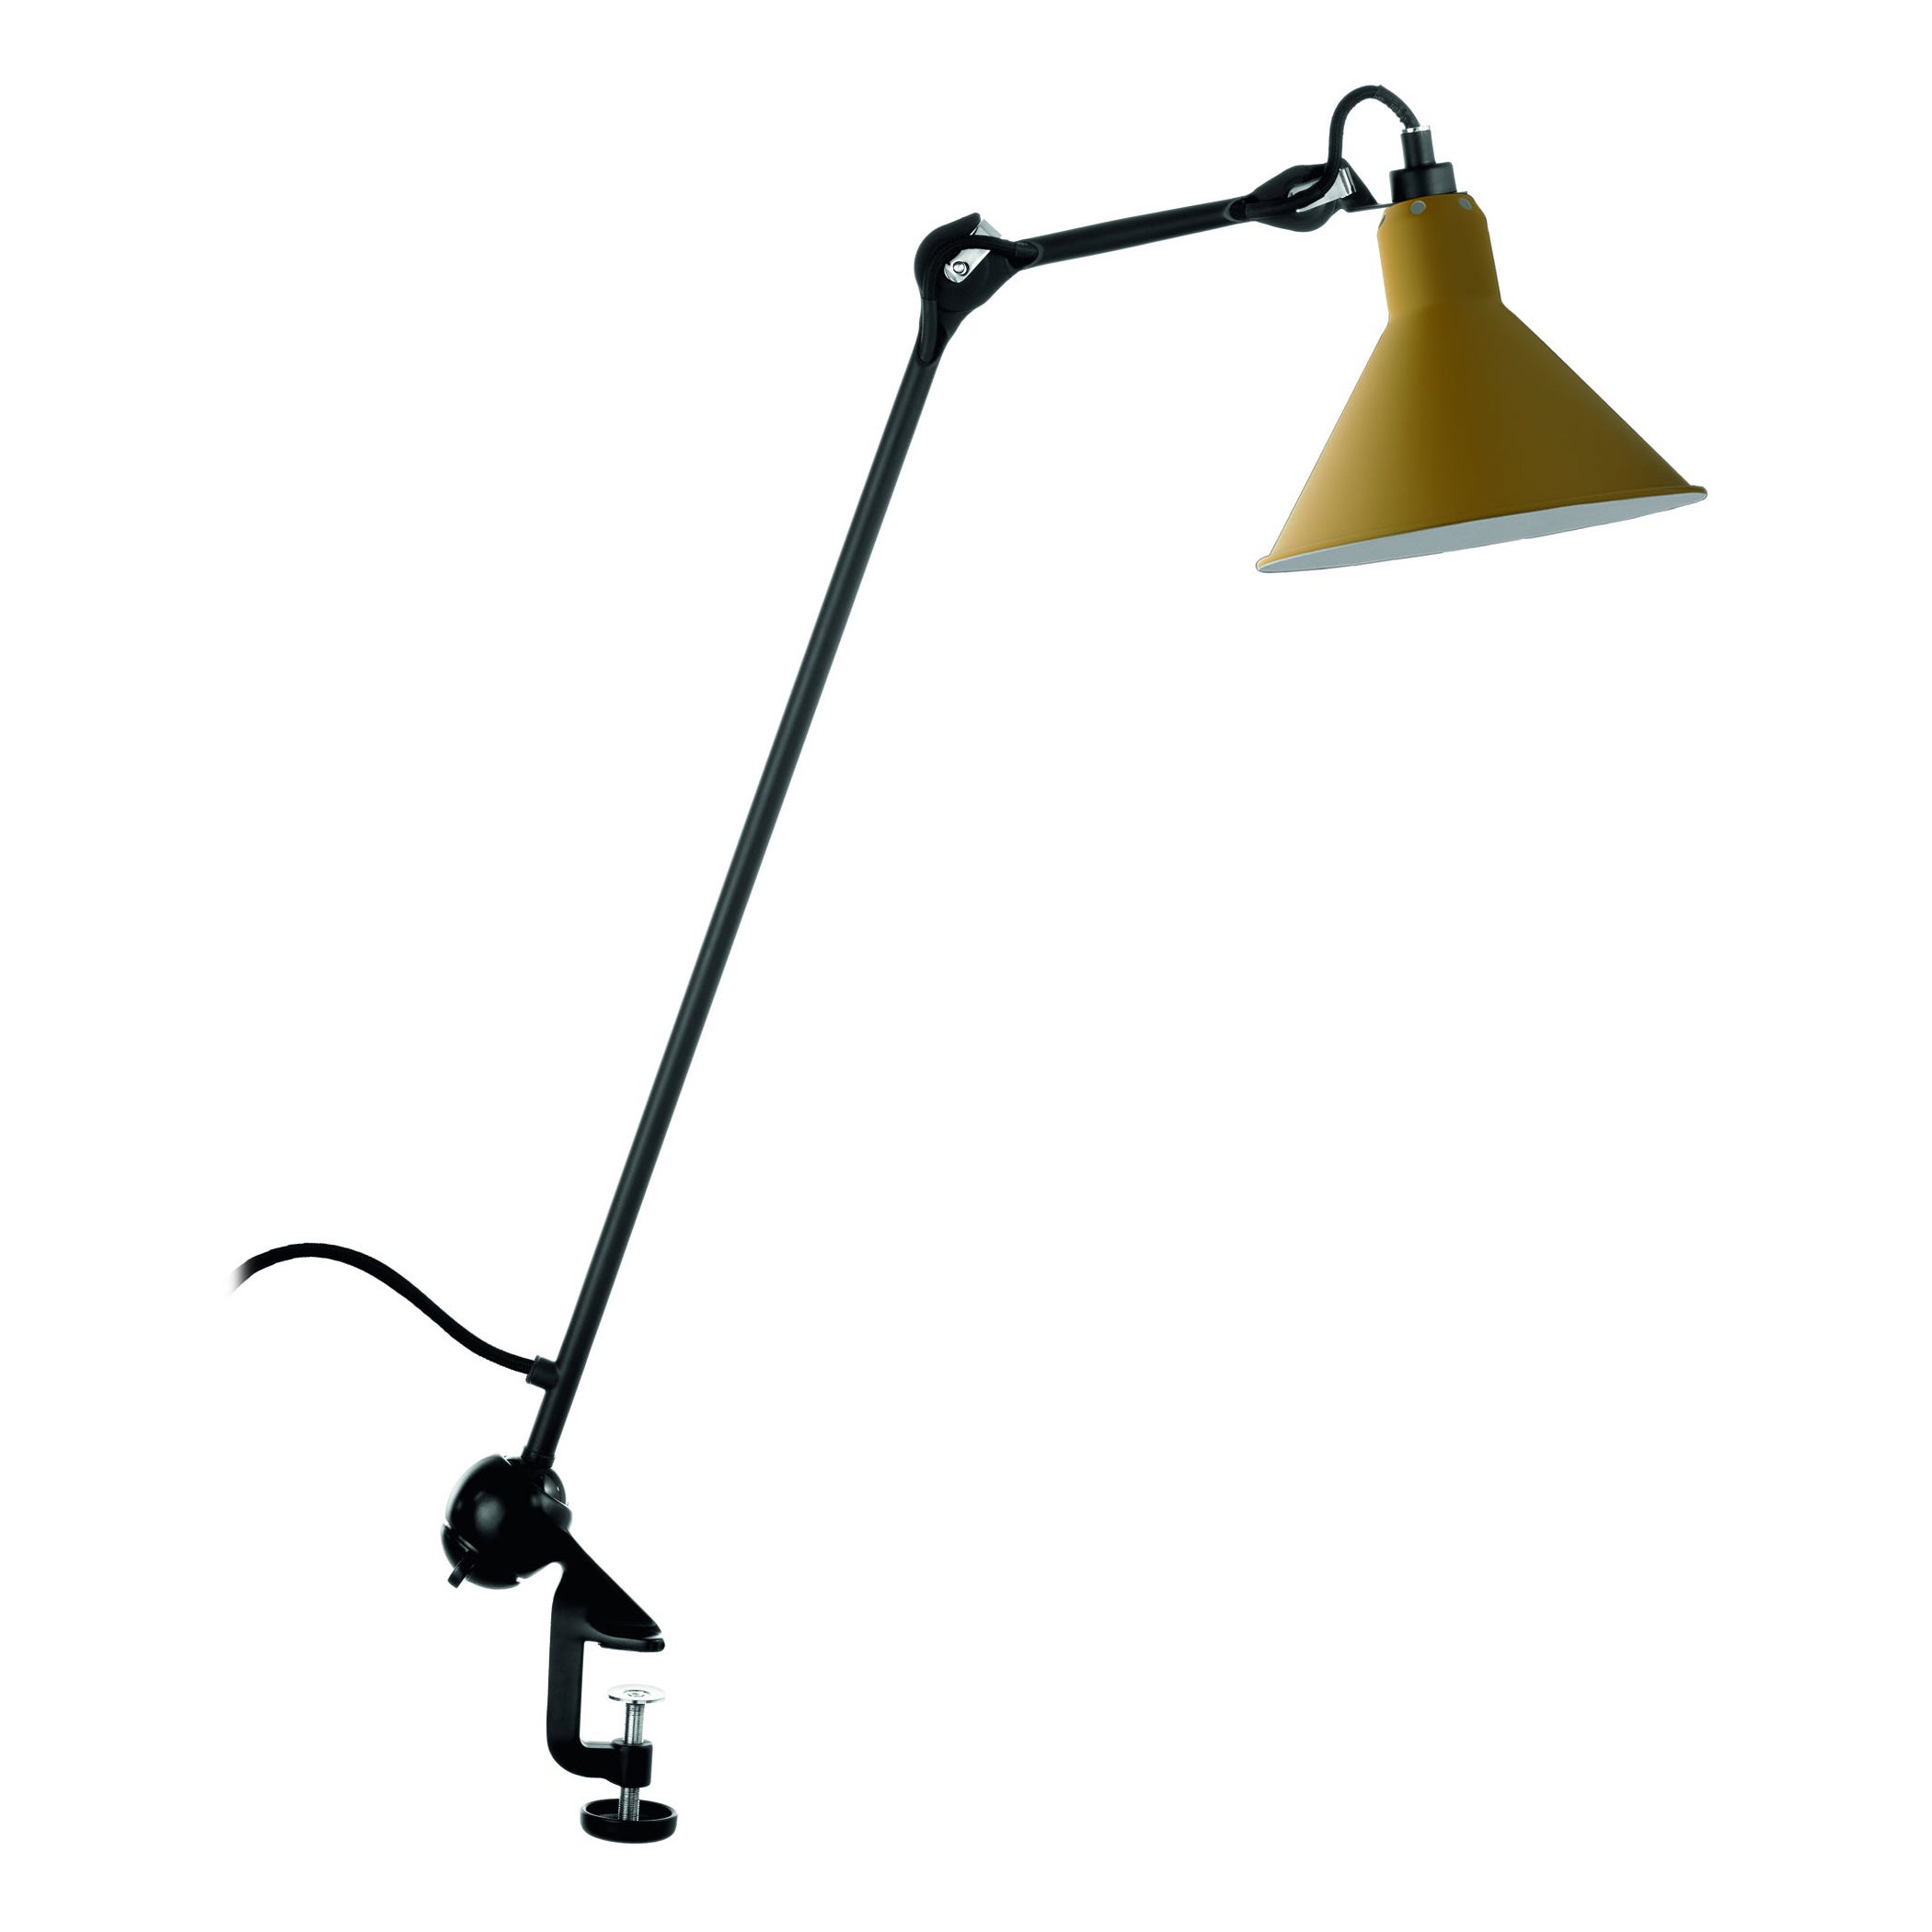 DCW Editions La Lampe Gras N°201 Conic Table Lamp in Black Arm and Yellow Shade For Sale